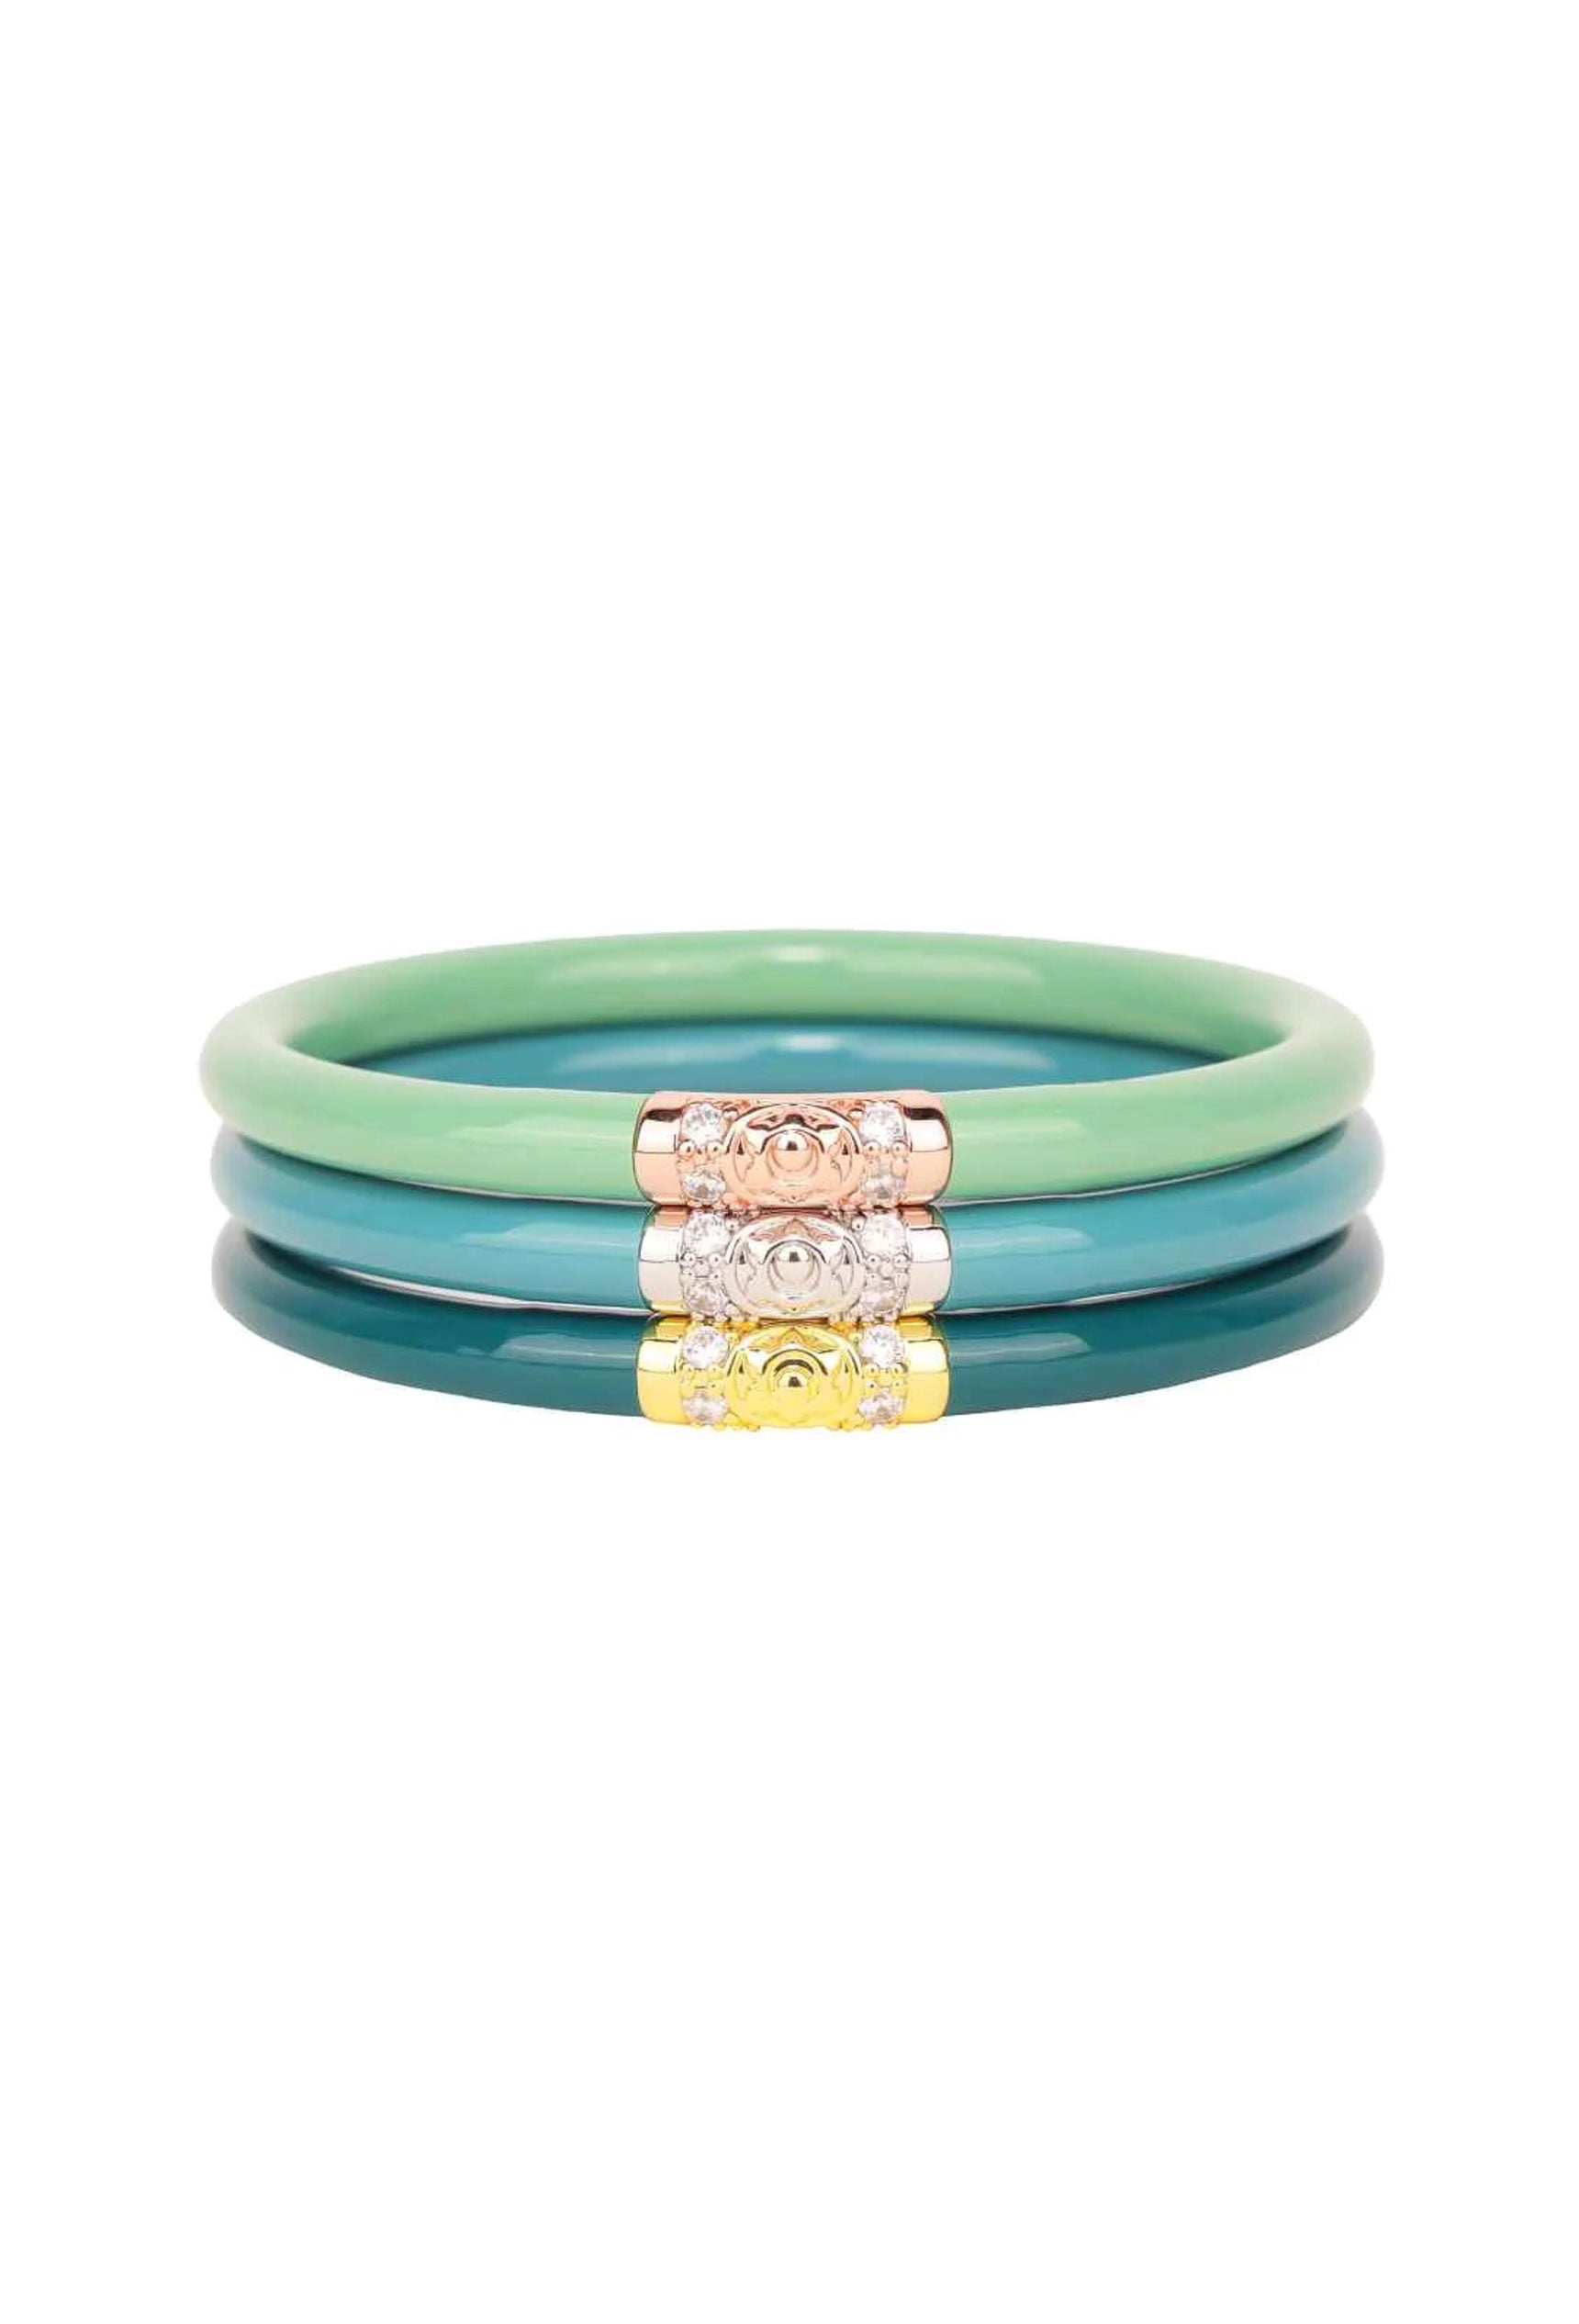 BUDHAGIRL Three Kings All Weather Bangles in Fjord, Set of three angels in three shade of green.